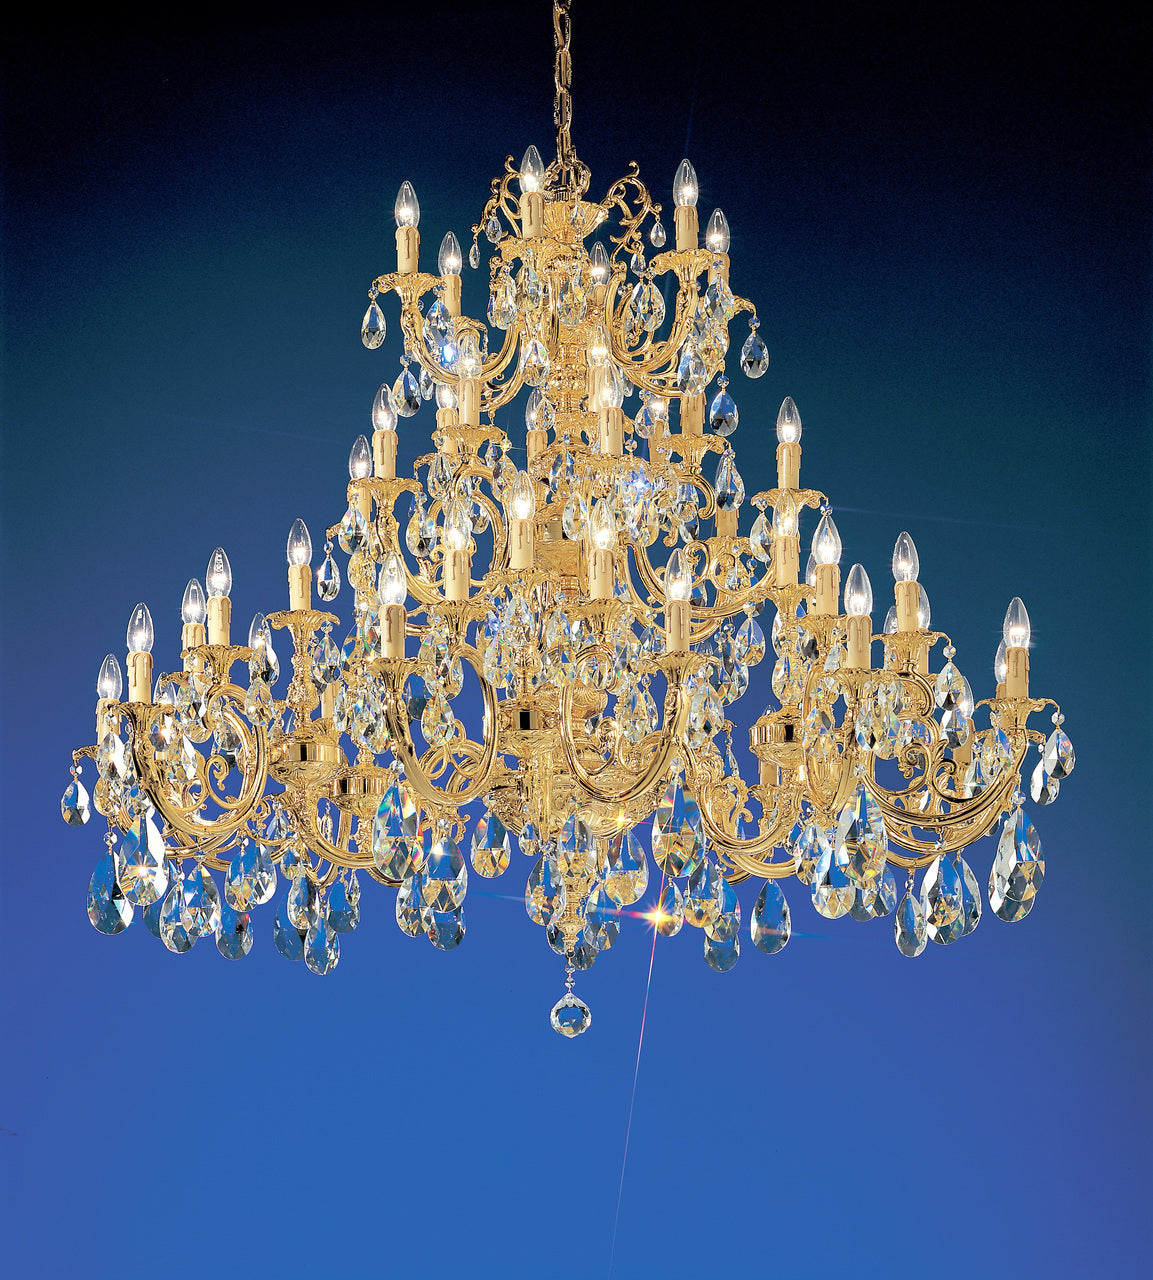 Classic Lighting 5748 G SC Princeton Crystal/Cast Brass Chandelier in 24k Gold (Imported from Spain)